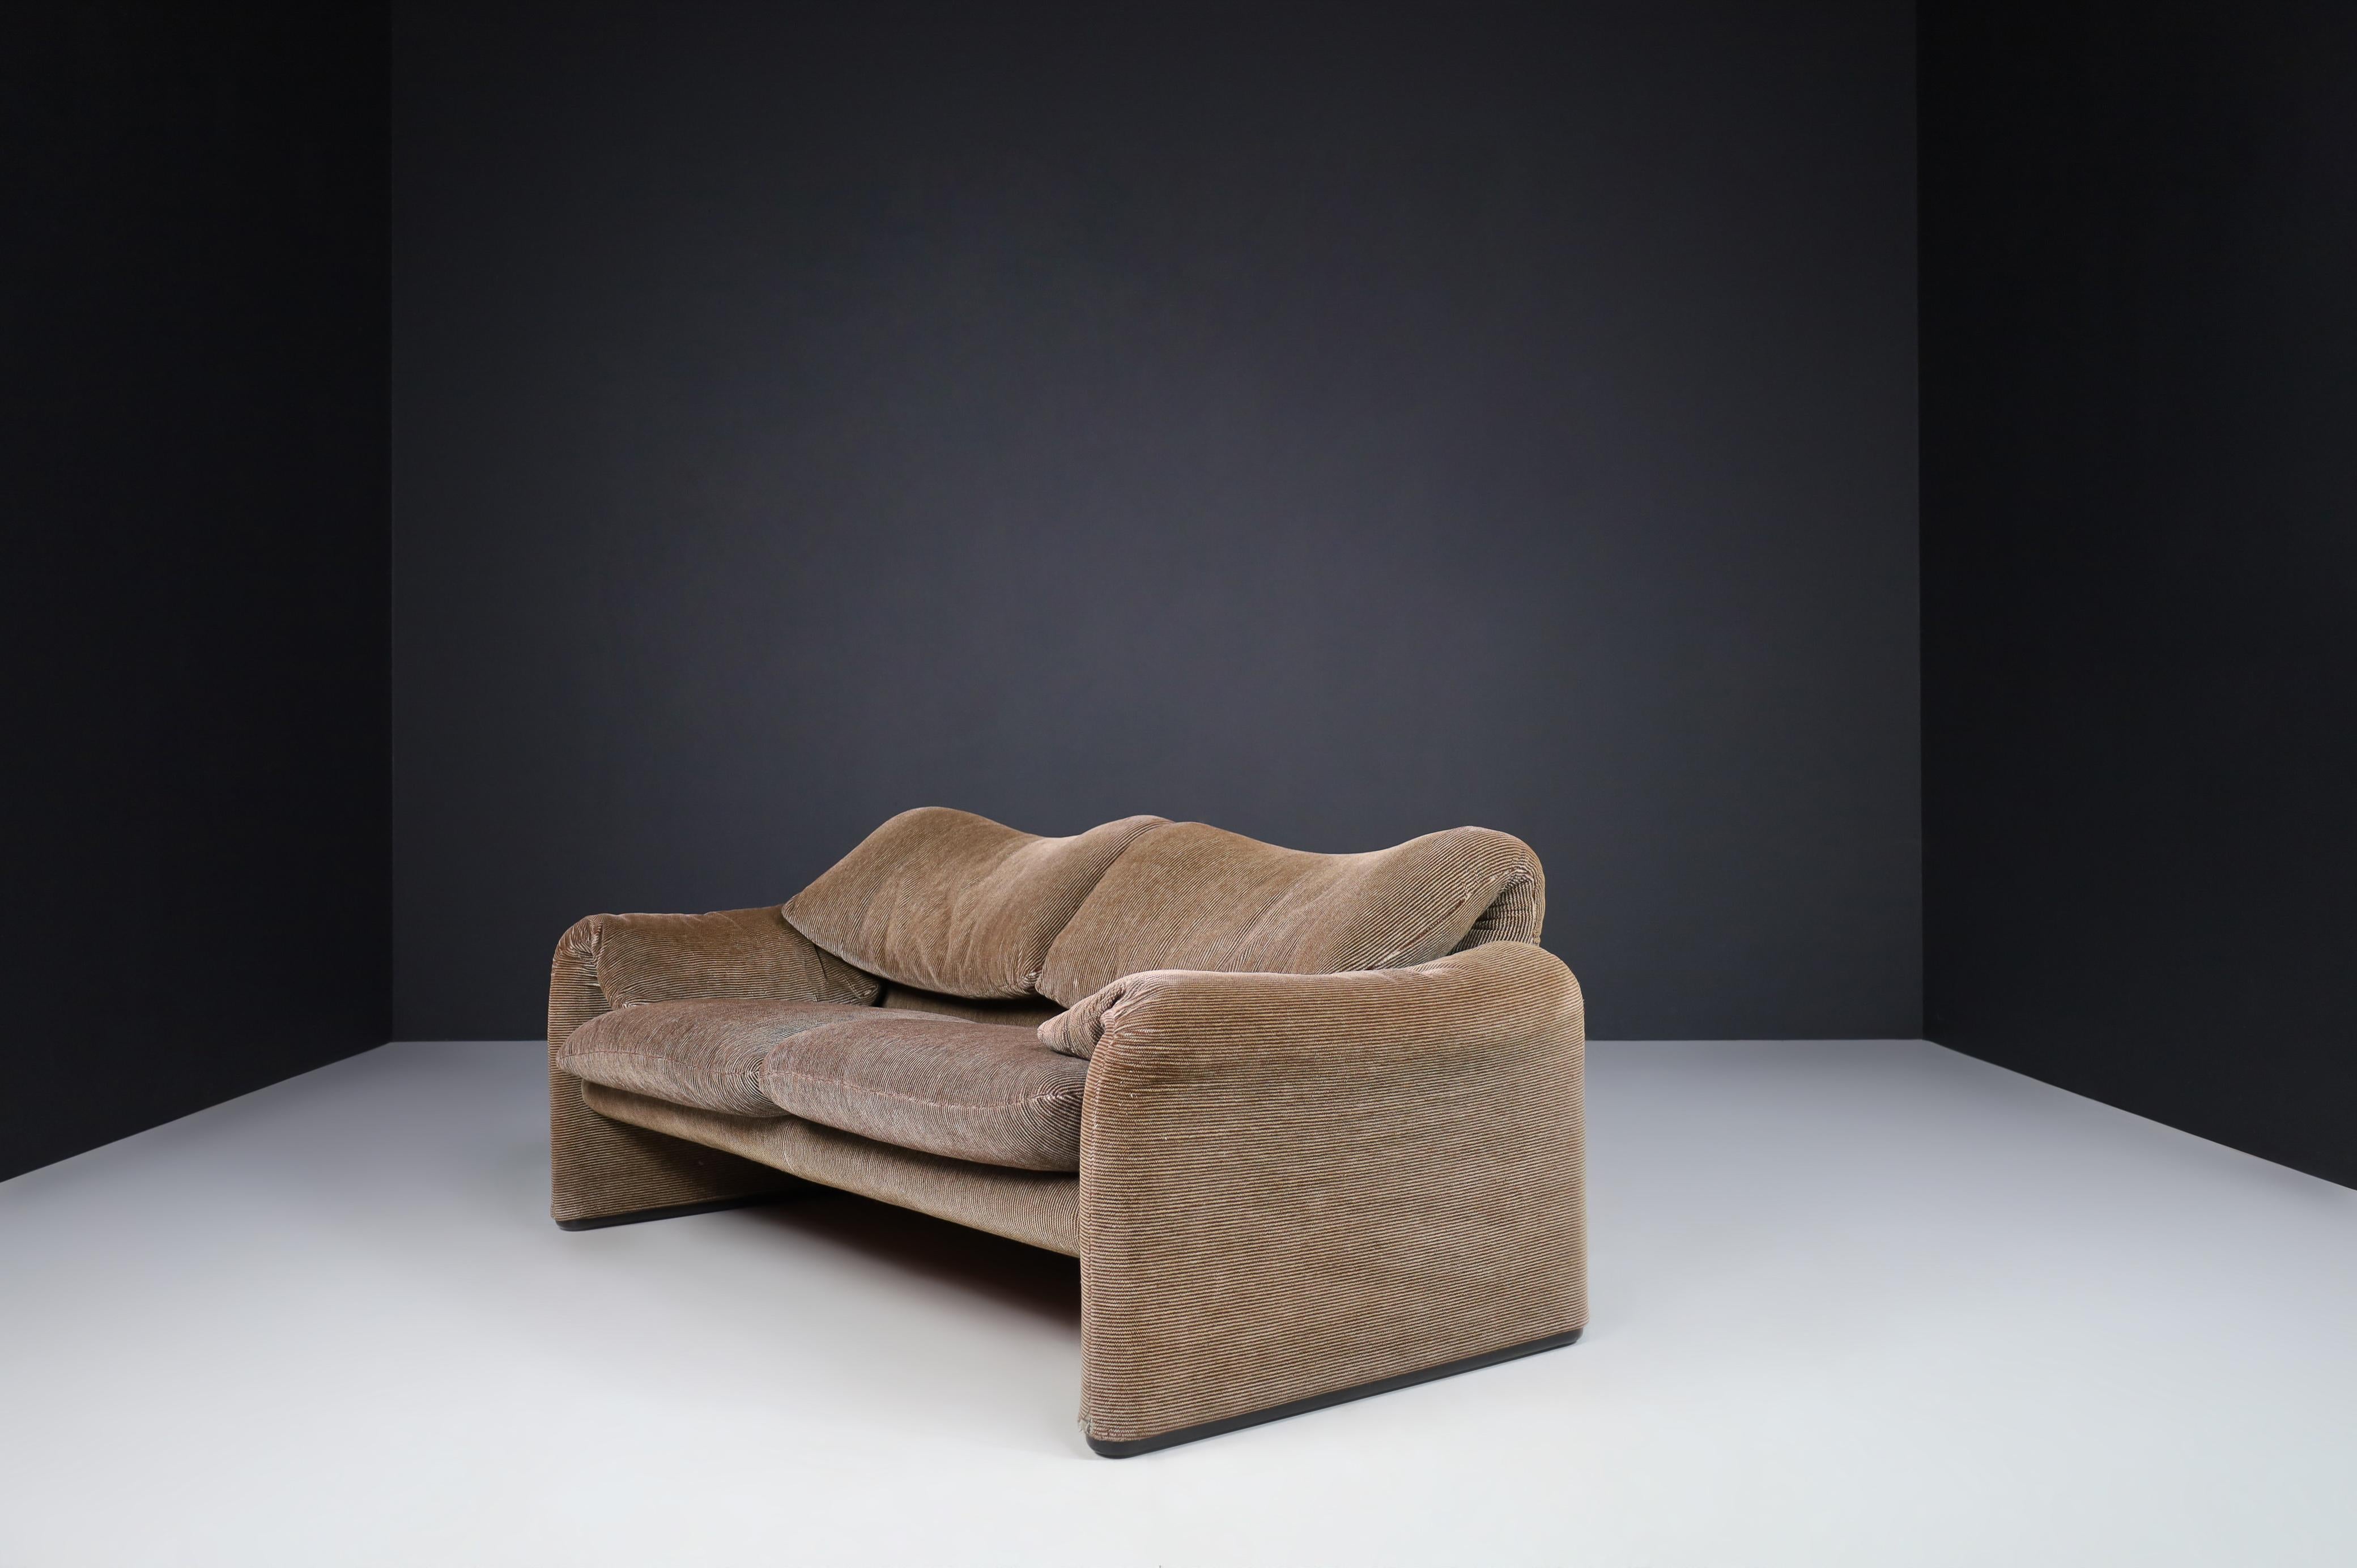 Steel Maralunga Sofas by Vico Magistretti for Cassina, 1970s For Sale